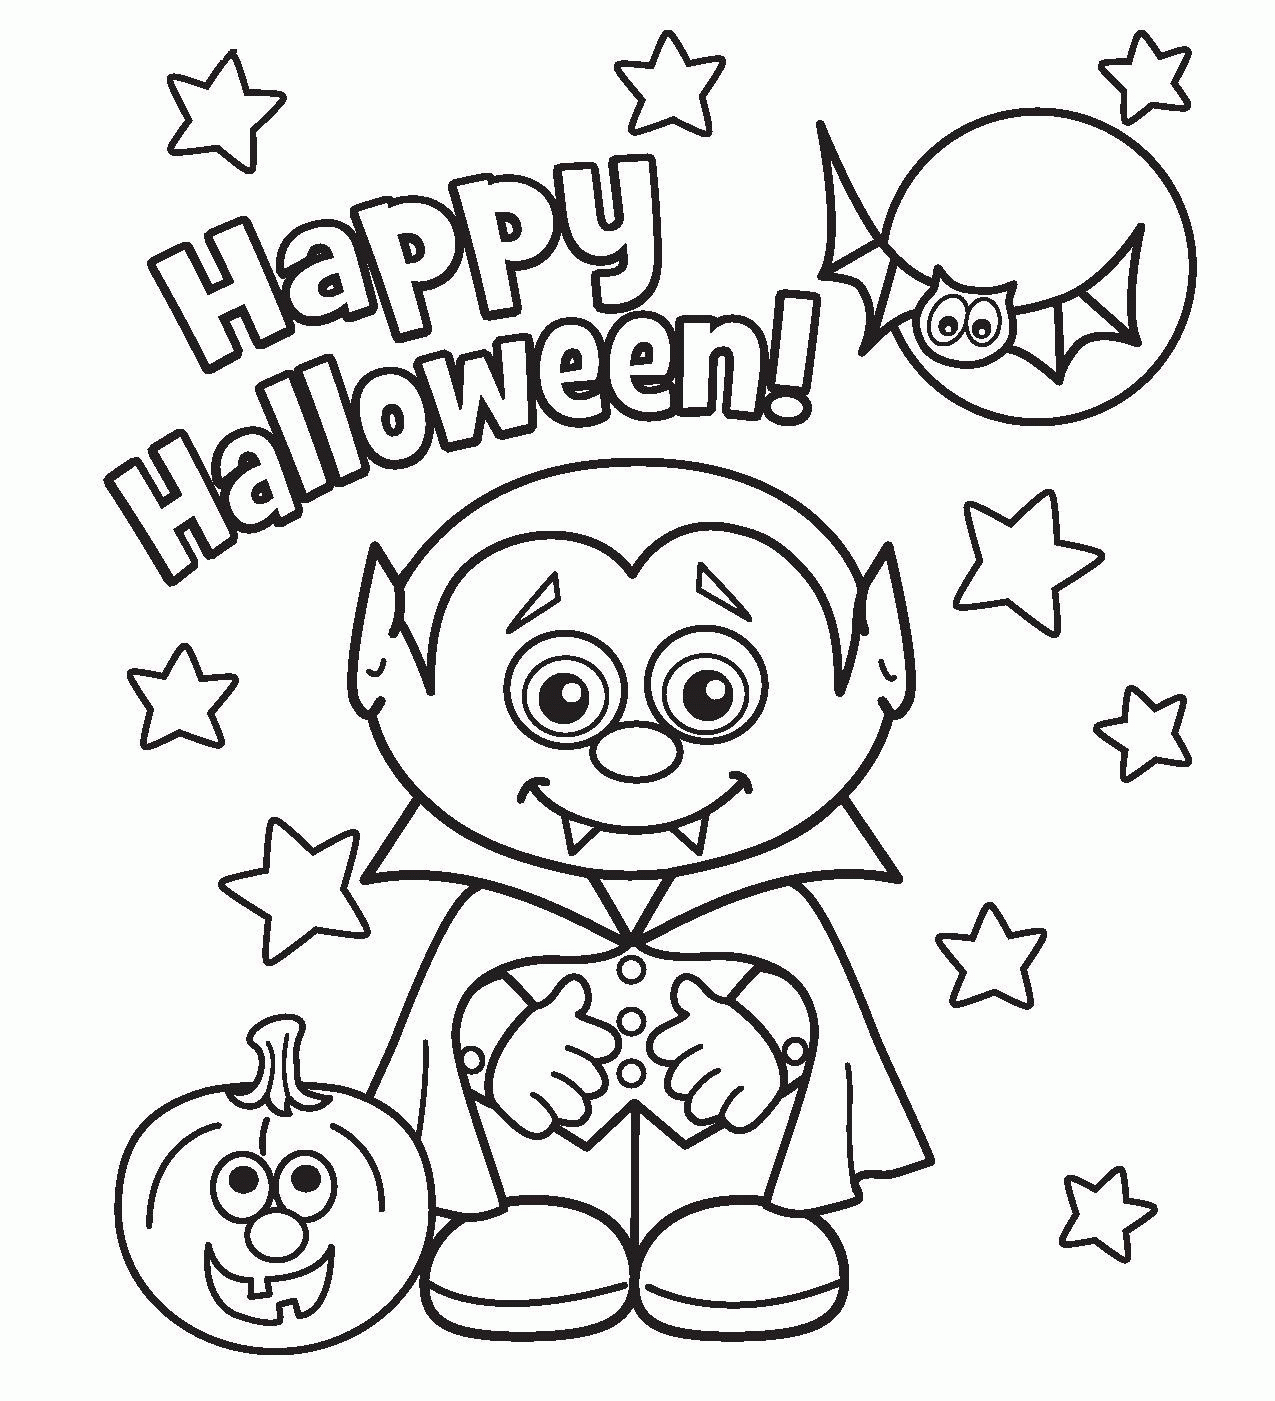  Fun Coloring Pages For Older Kids 8